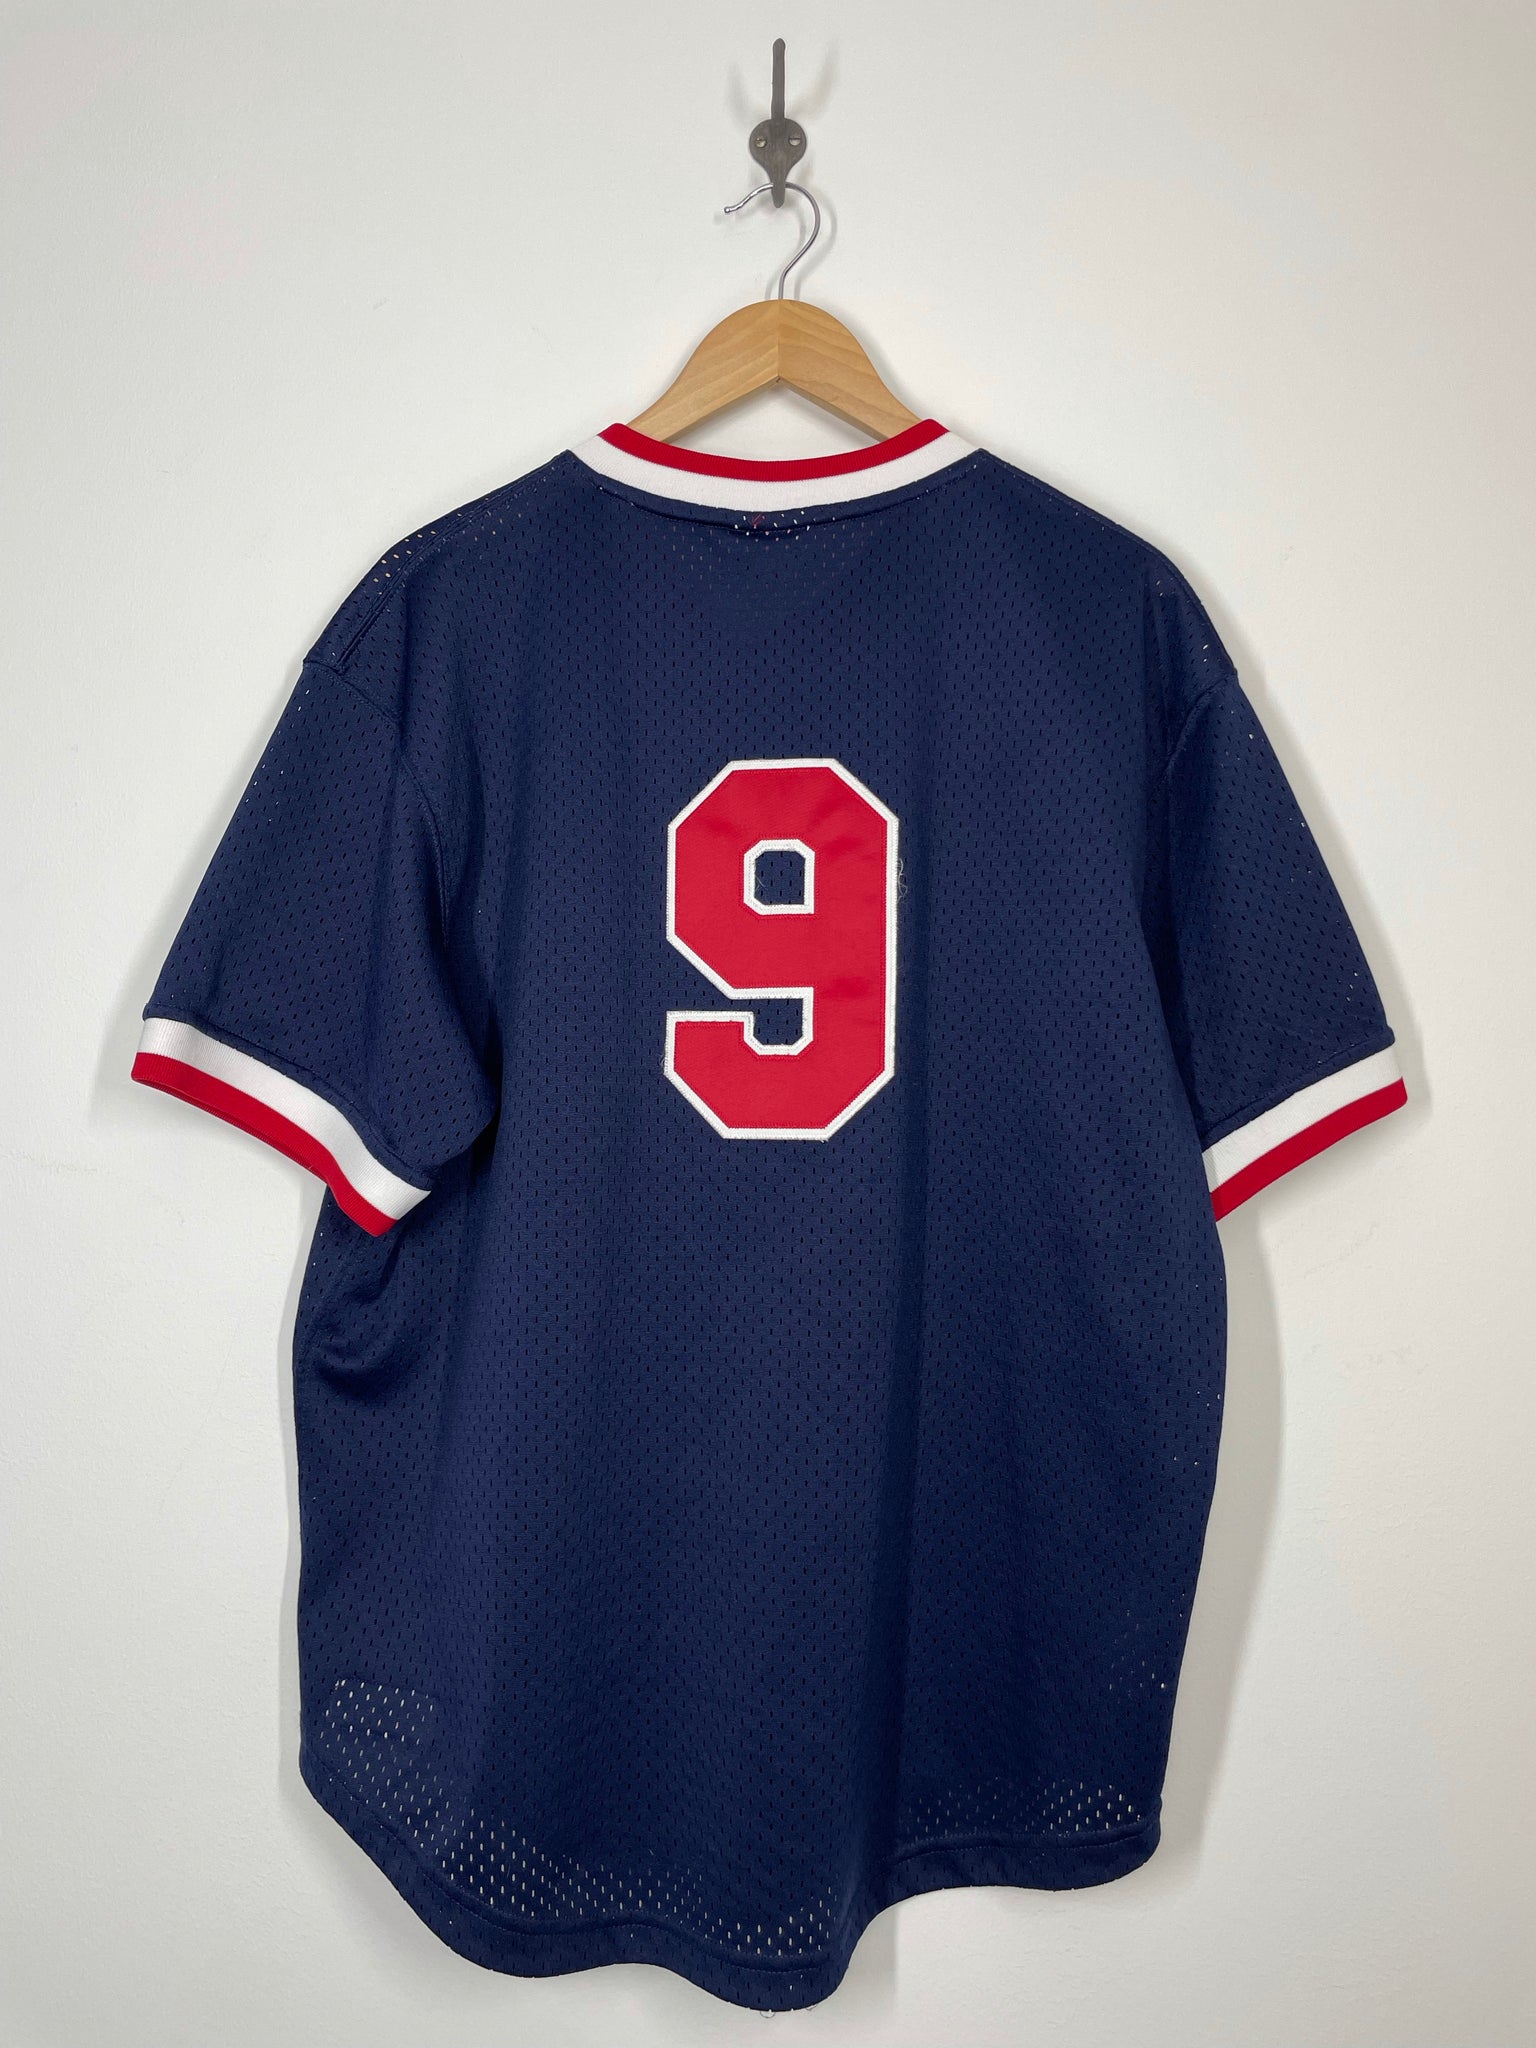 Authentic Ted Williams Boston Red Sox 1990 Pullover Jersey - Shop Mitchell  & Ness Authentic Jerseys and Replicas Mitchell & Ness Nostalgia Co.